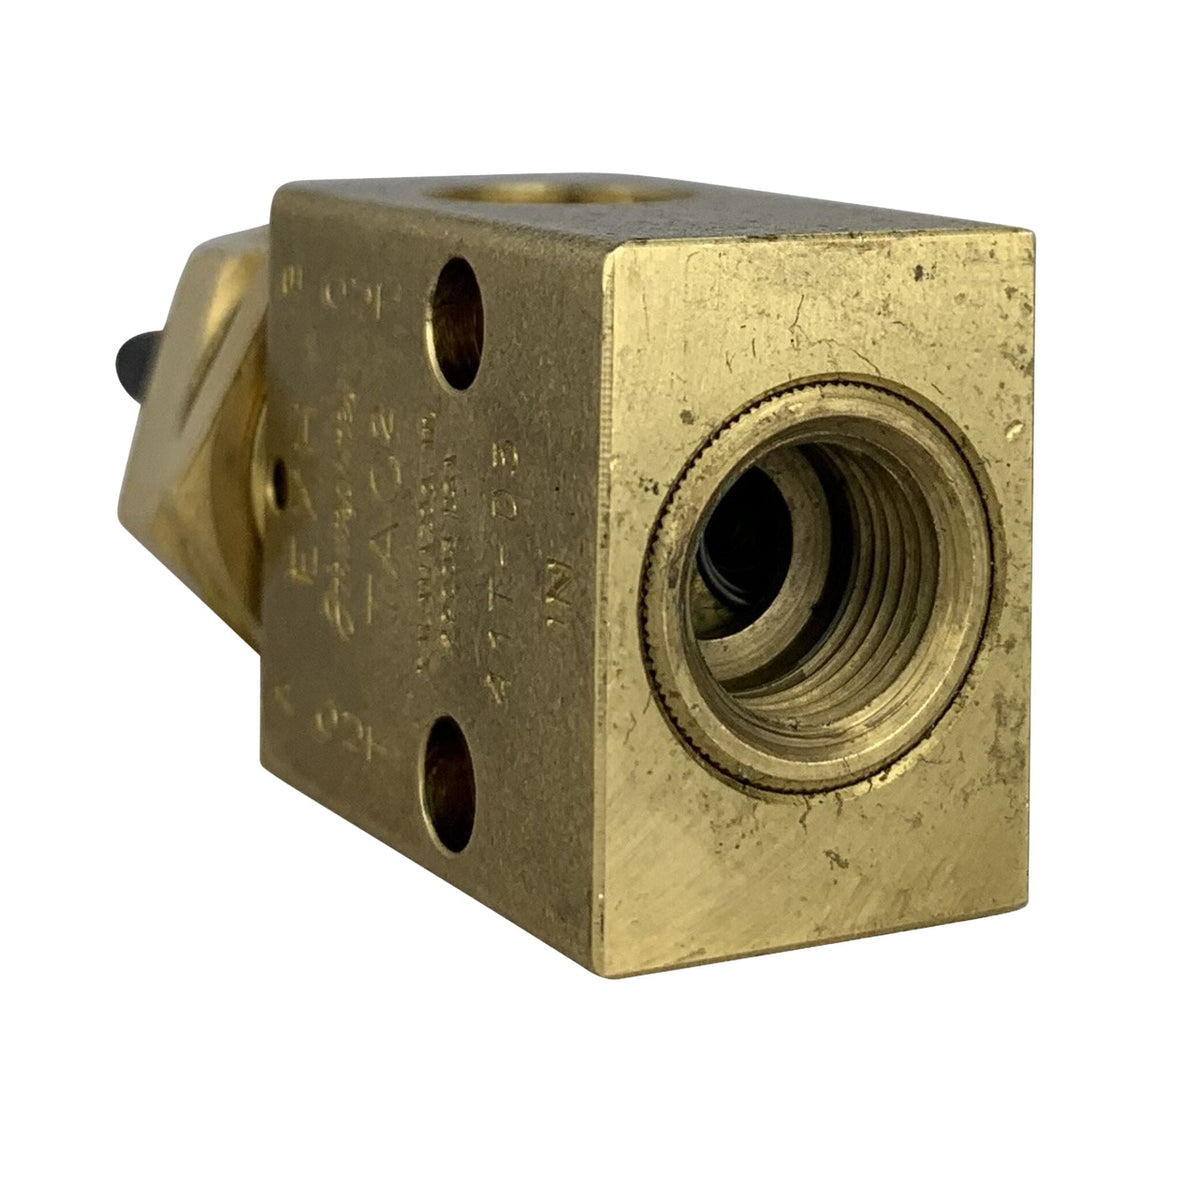 3 way brass valve with toggle and threaded collar